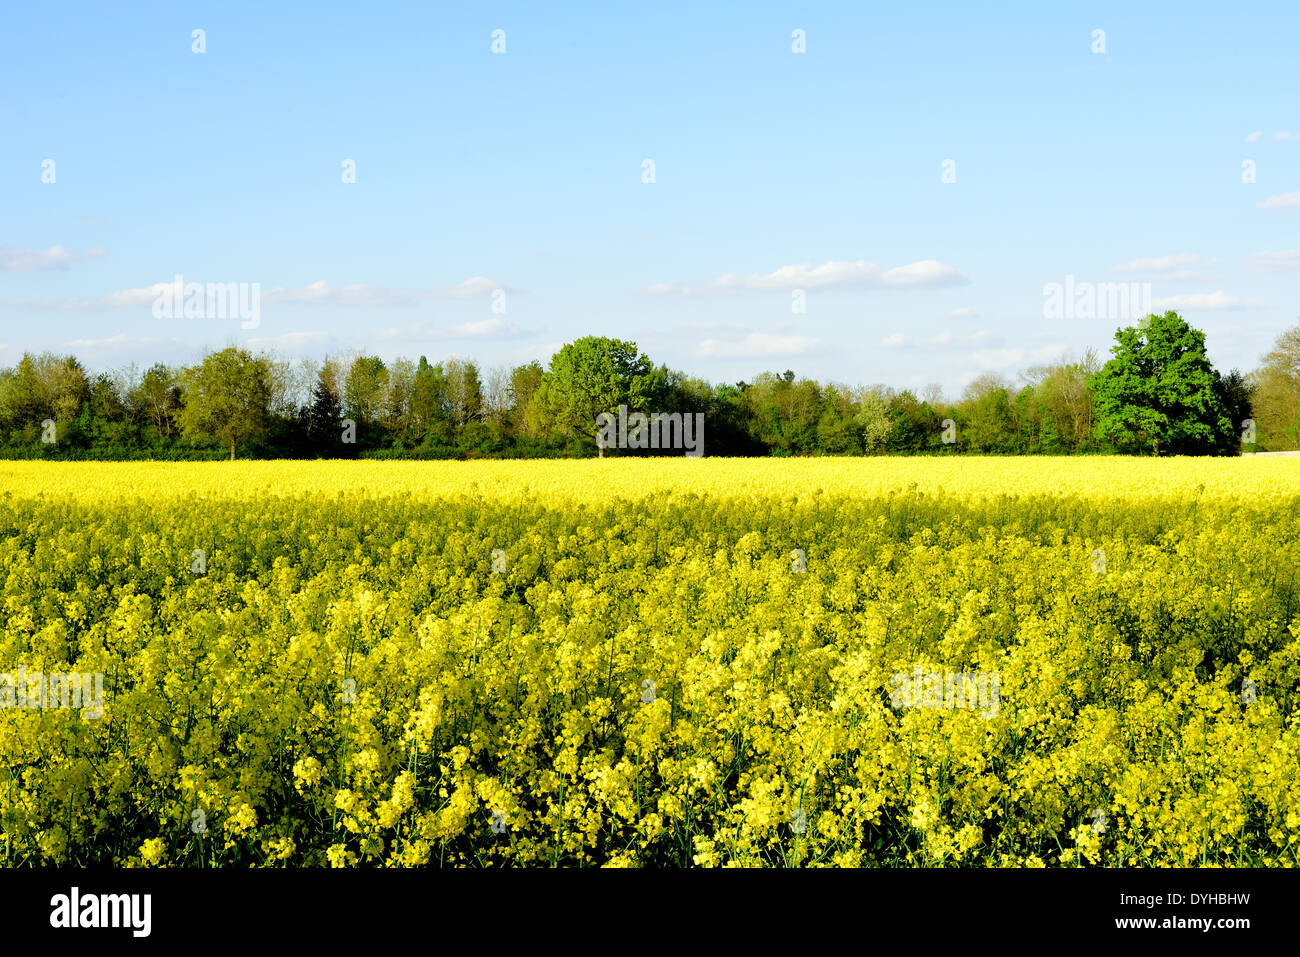 Fields of yellow crops to make oilseed oil Stock Photo